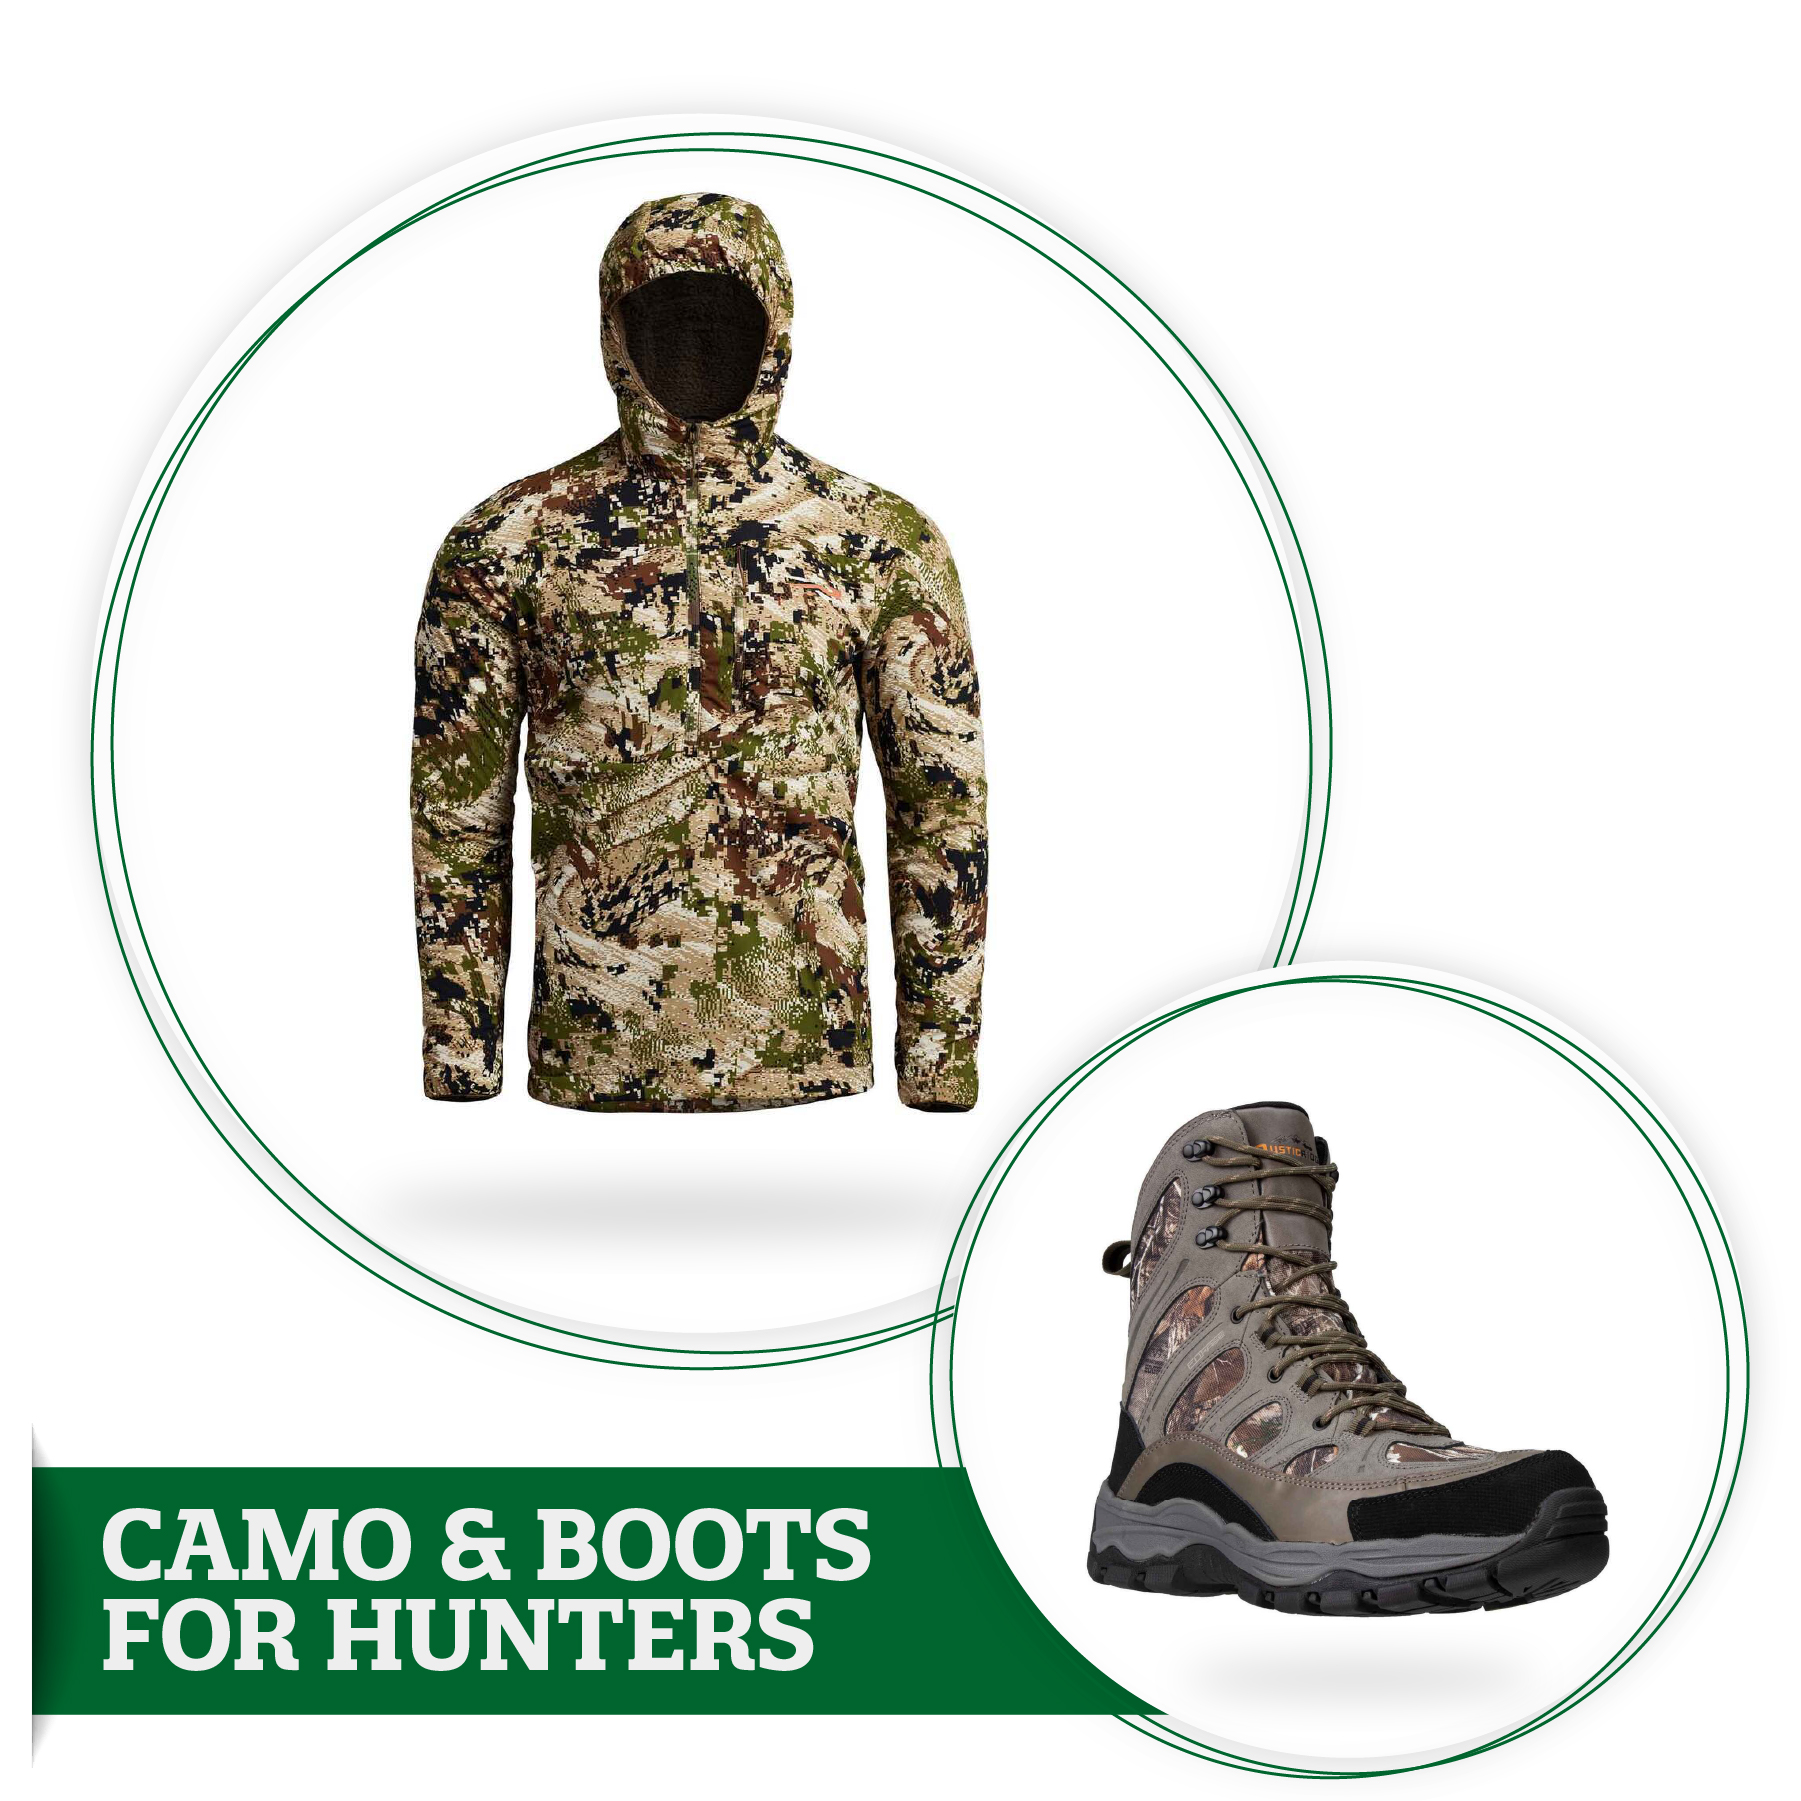 Camo & Boots for Hunters